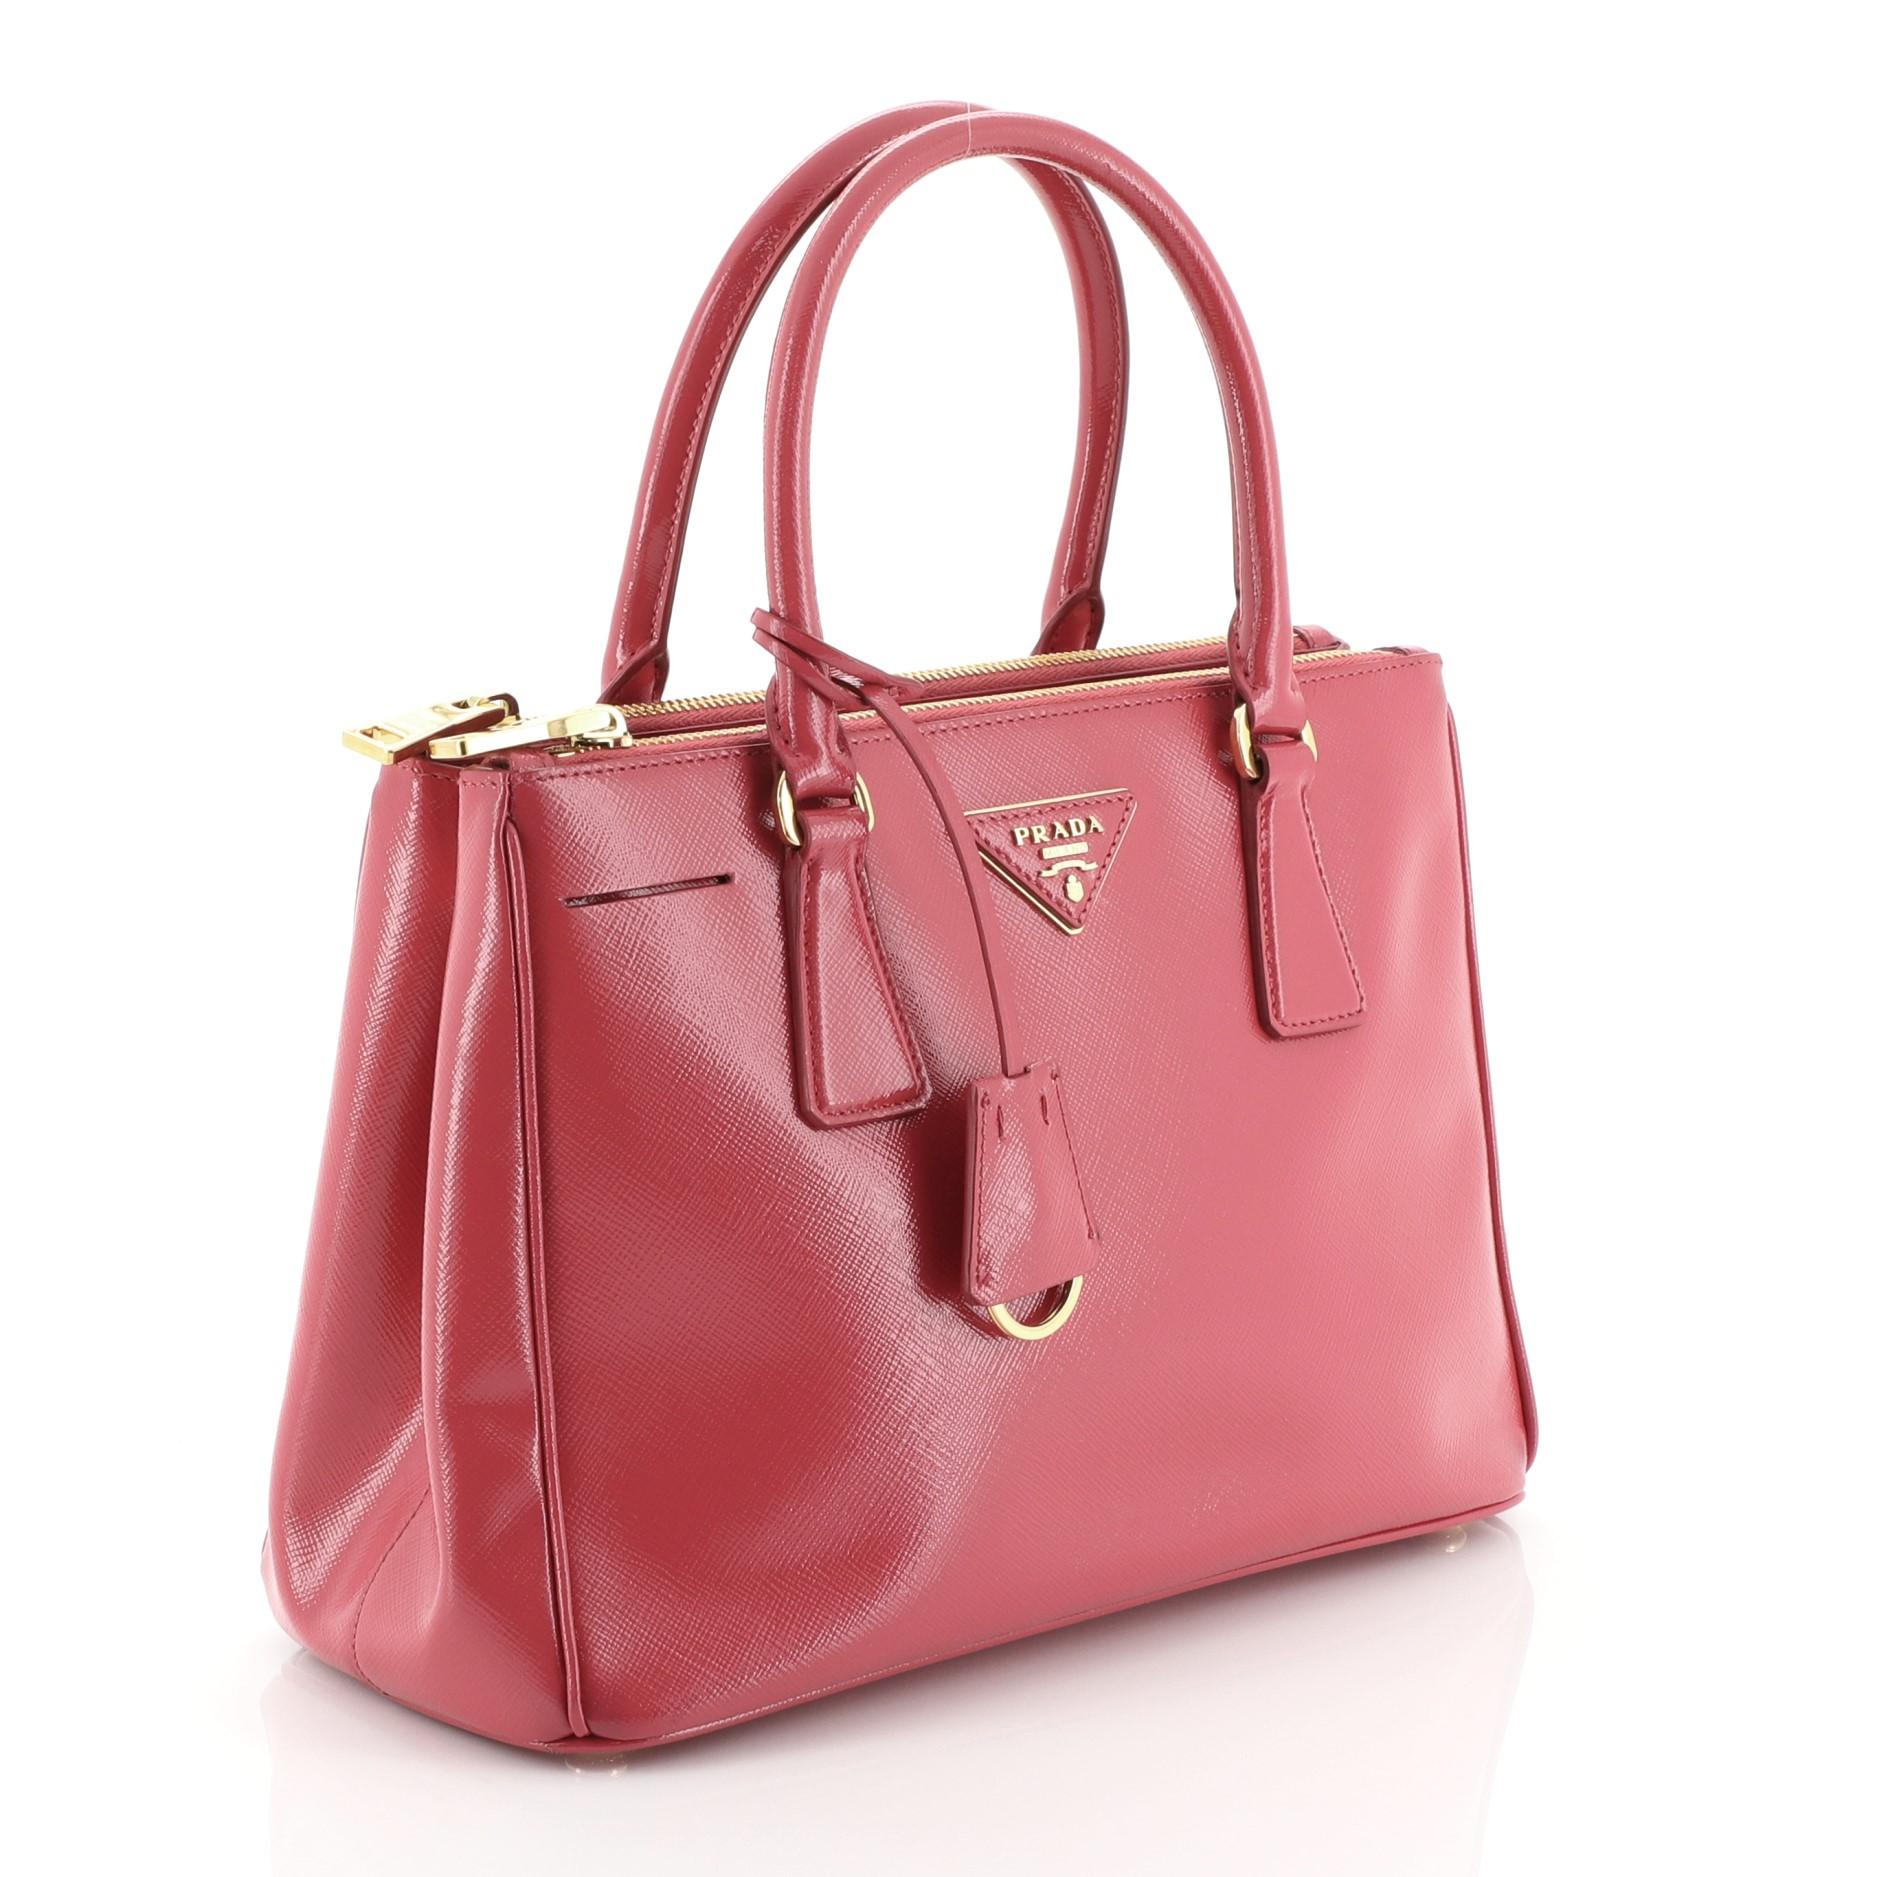 This Prada Double Zip Lux Tote Vernice Saffiano Leather Mini, crafted from pink vernice saffiano leather, features dual rolled handles, raised Prada logo plate, and gold-tone hardware. It opens to a pink fabric interior with two zip compartments on